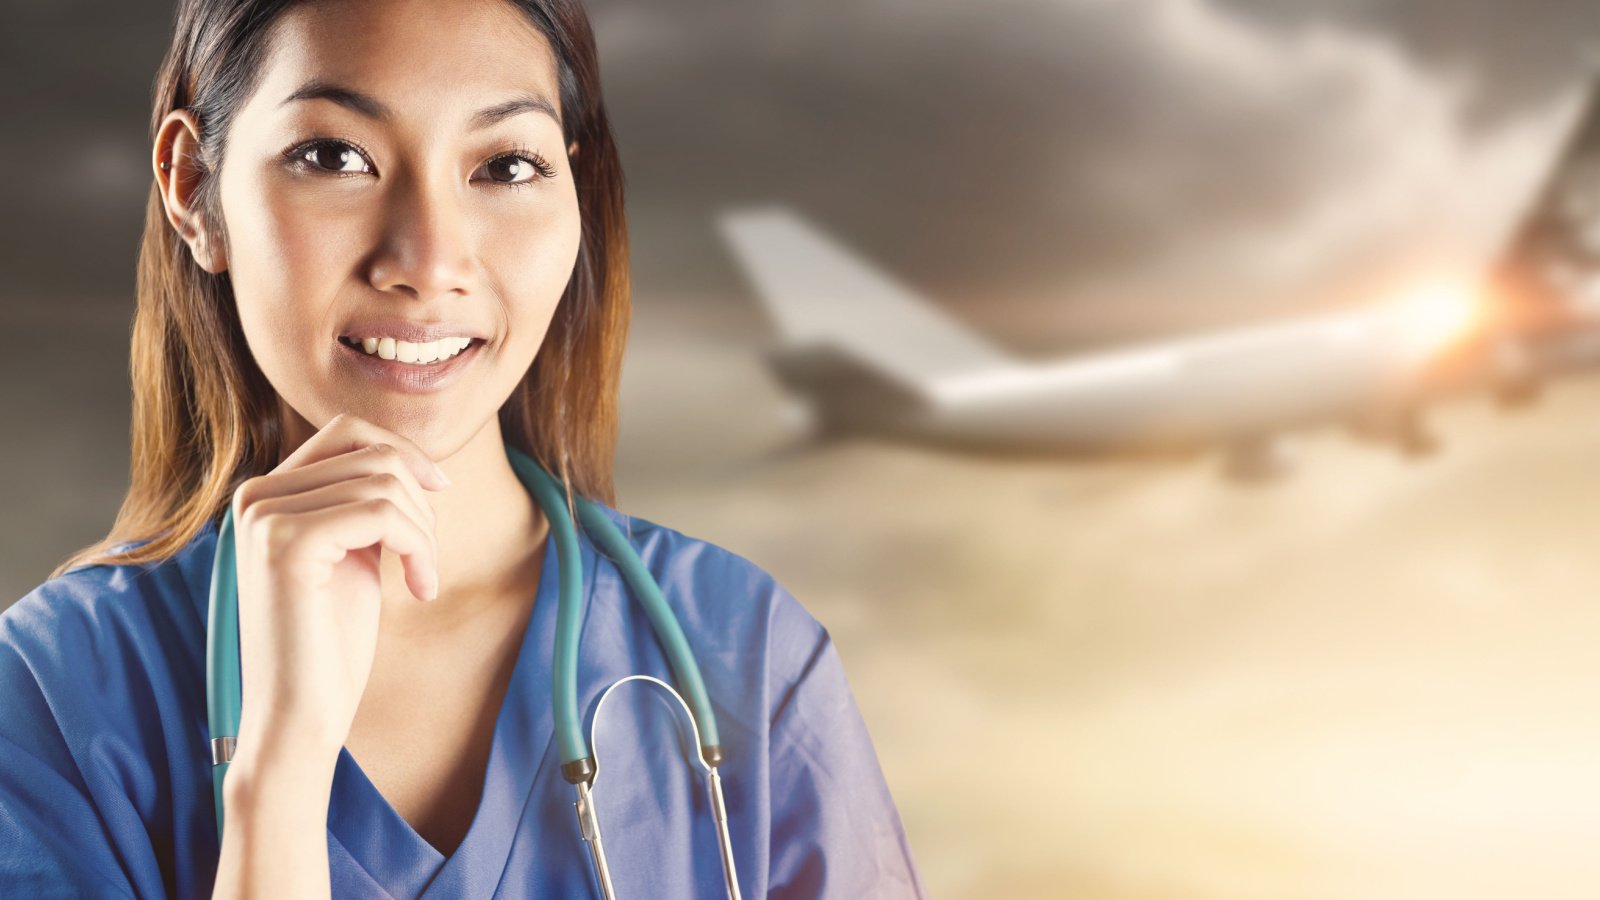 <p><span>As a nurse, traveling to different parts of the world, providing medical assistance, and working in medical centers can provide a fulfilling career and life experience. </span></p><p><span>Many travel nursing companies cover housing and travel costs for short-term assignments, allowing nurses to explore new places. Joining a reputable agency ensures your credentials and safety are vetted.</span></p>